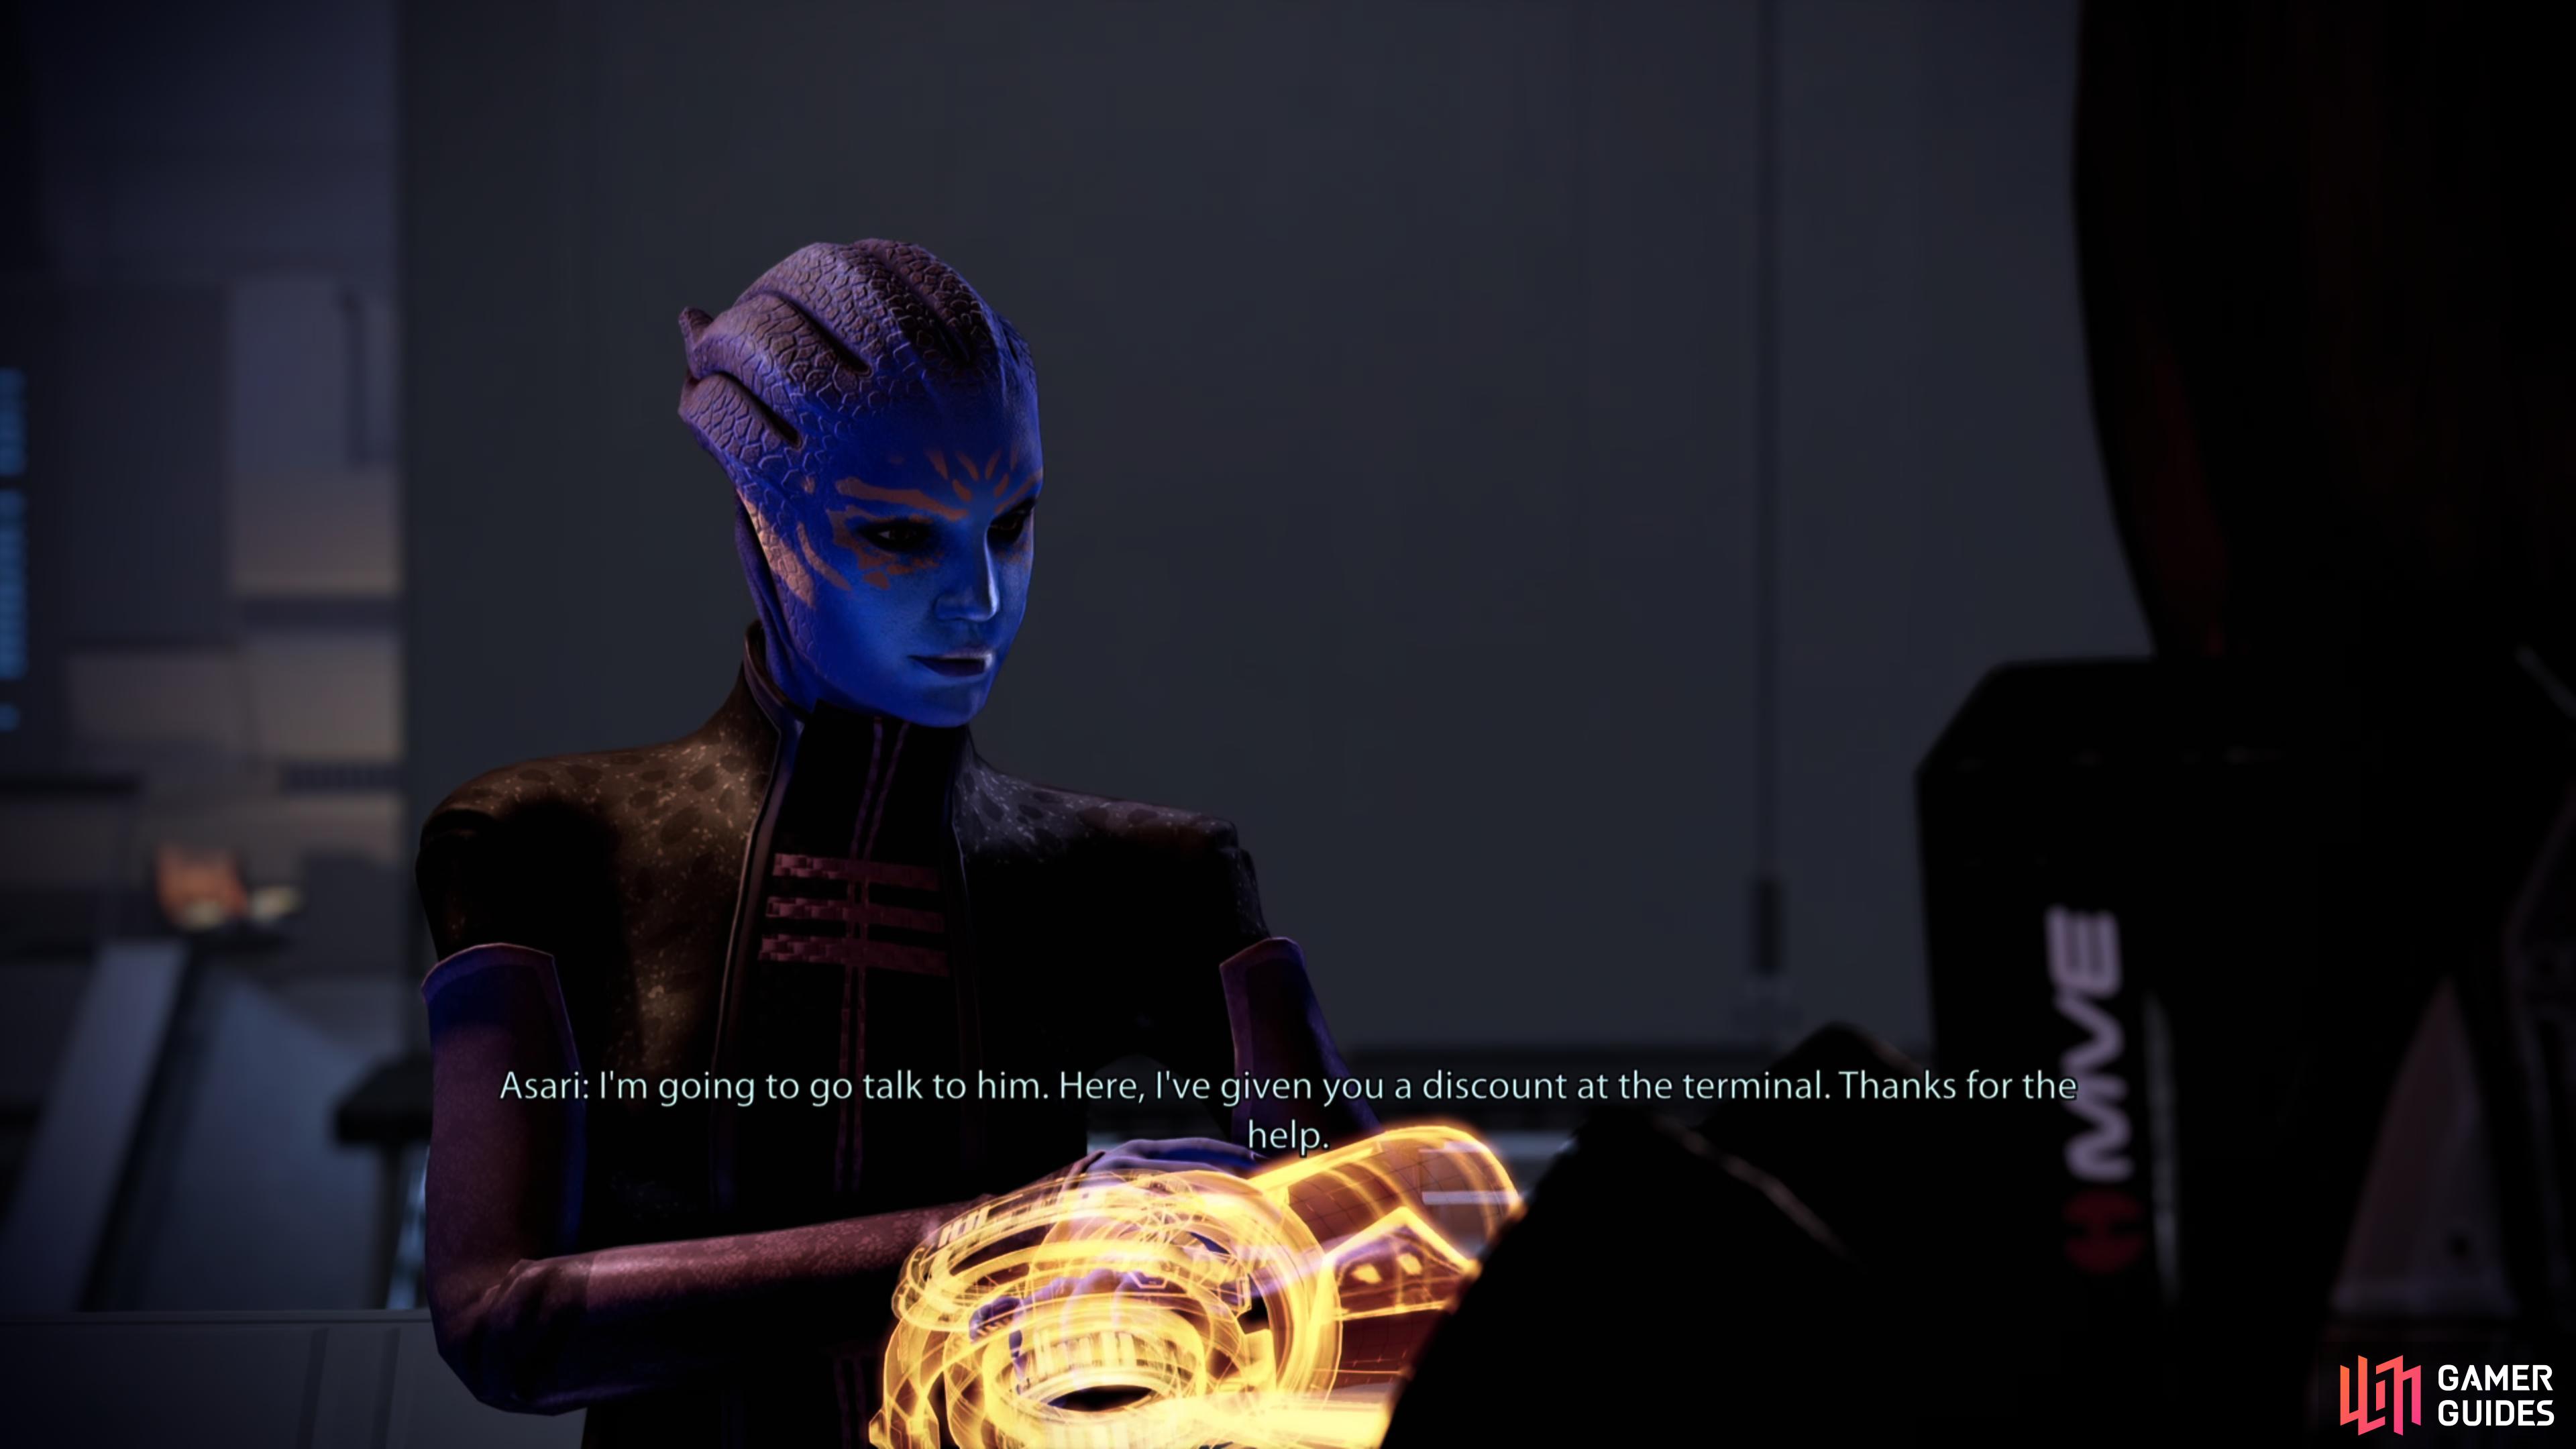 Convince the asari proprietress of the "Memories of Illium" kiosk to make a decision regarding her boyfriend to complete this assignment.